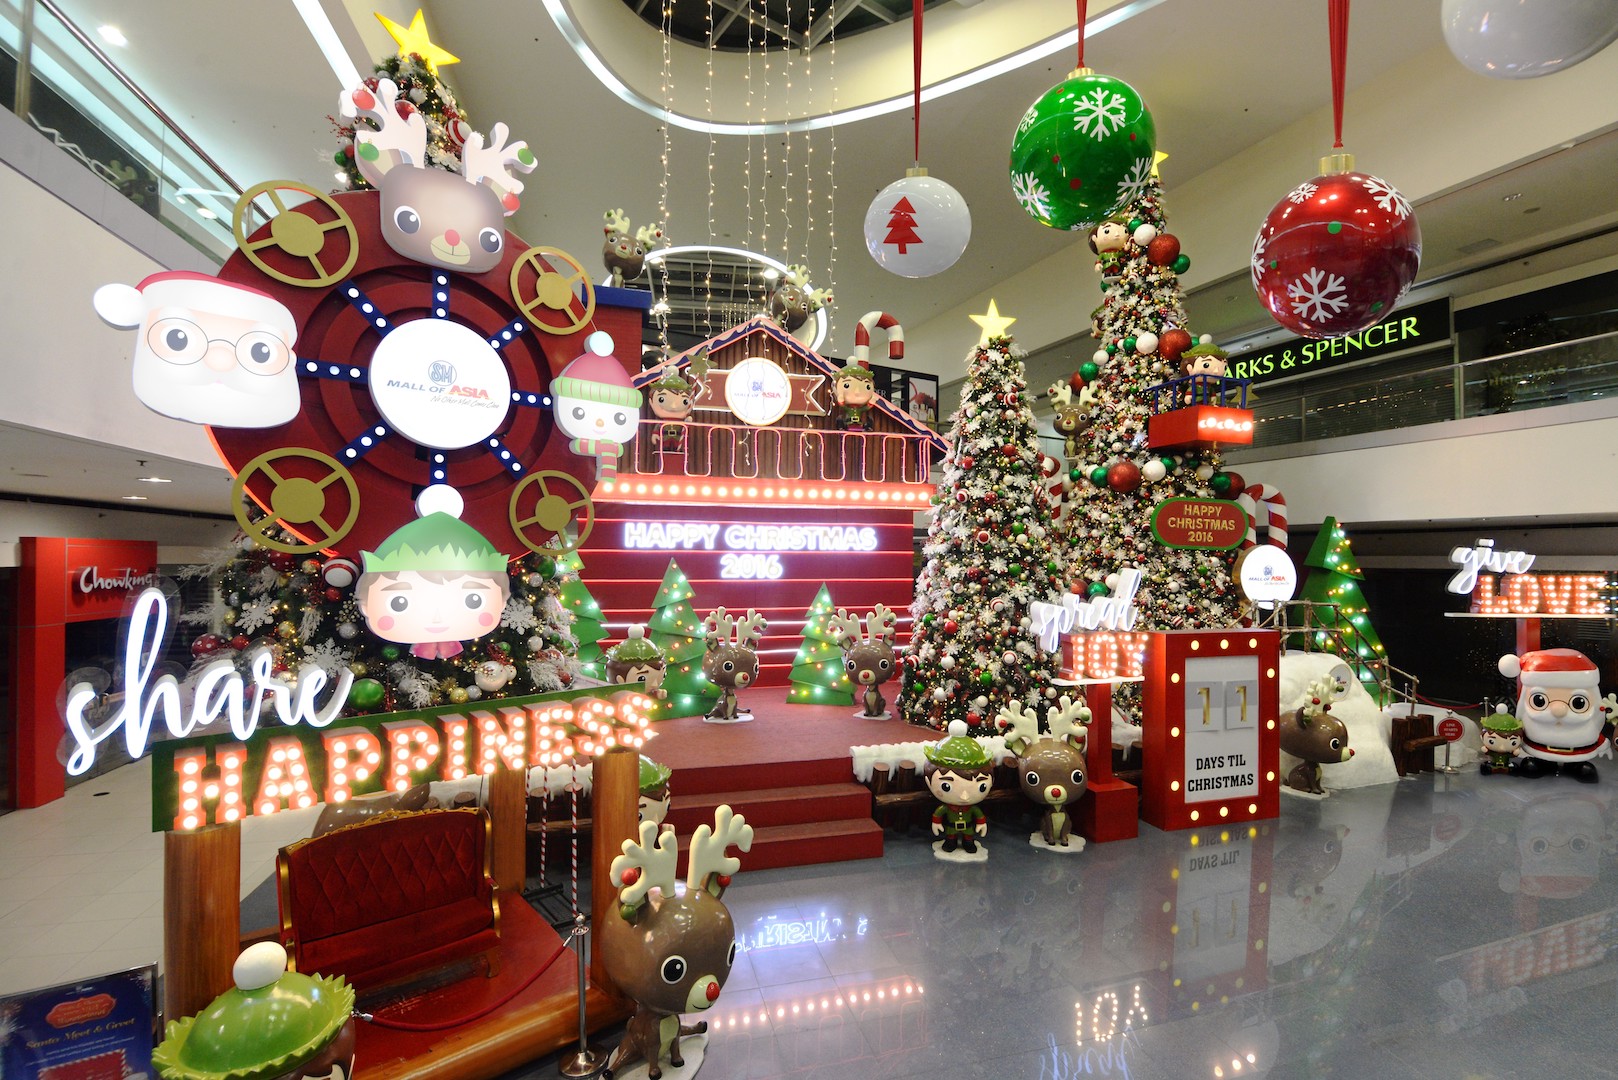 SM Supermalls brings the Philippines pride at the VM Christmas Awards